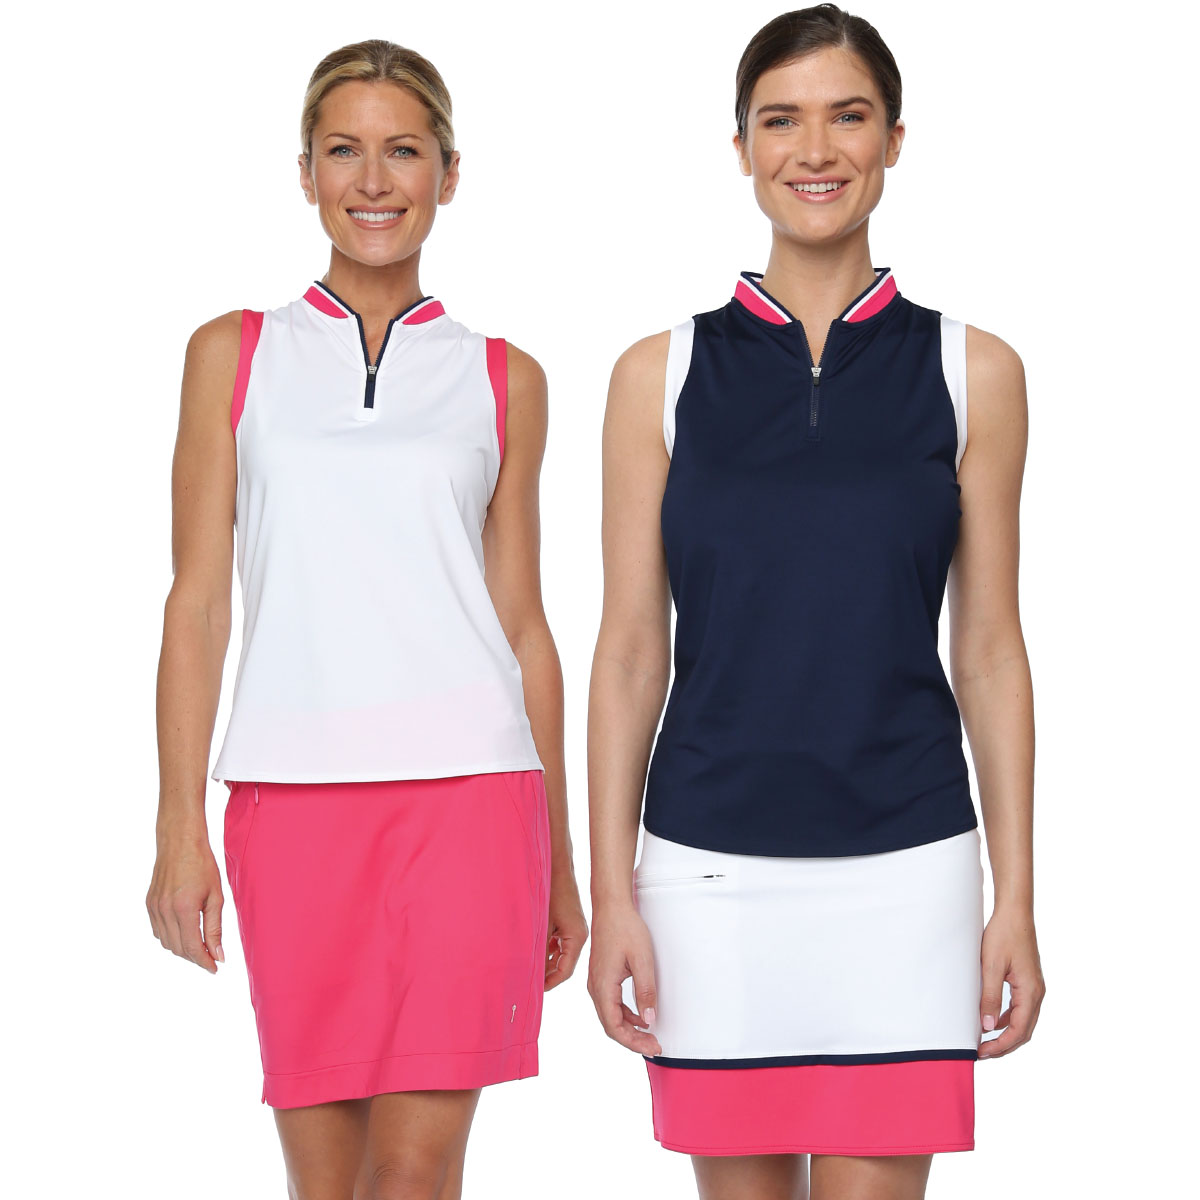 🗝️Because less is more.  
Our stylish separates are classic and no-fuss for a polished look. 

Link is in the Bio. 
#golfapparel #lifestyle #womensgolfapparel #belynkey